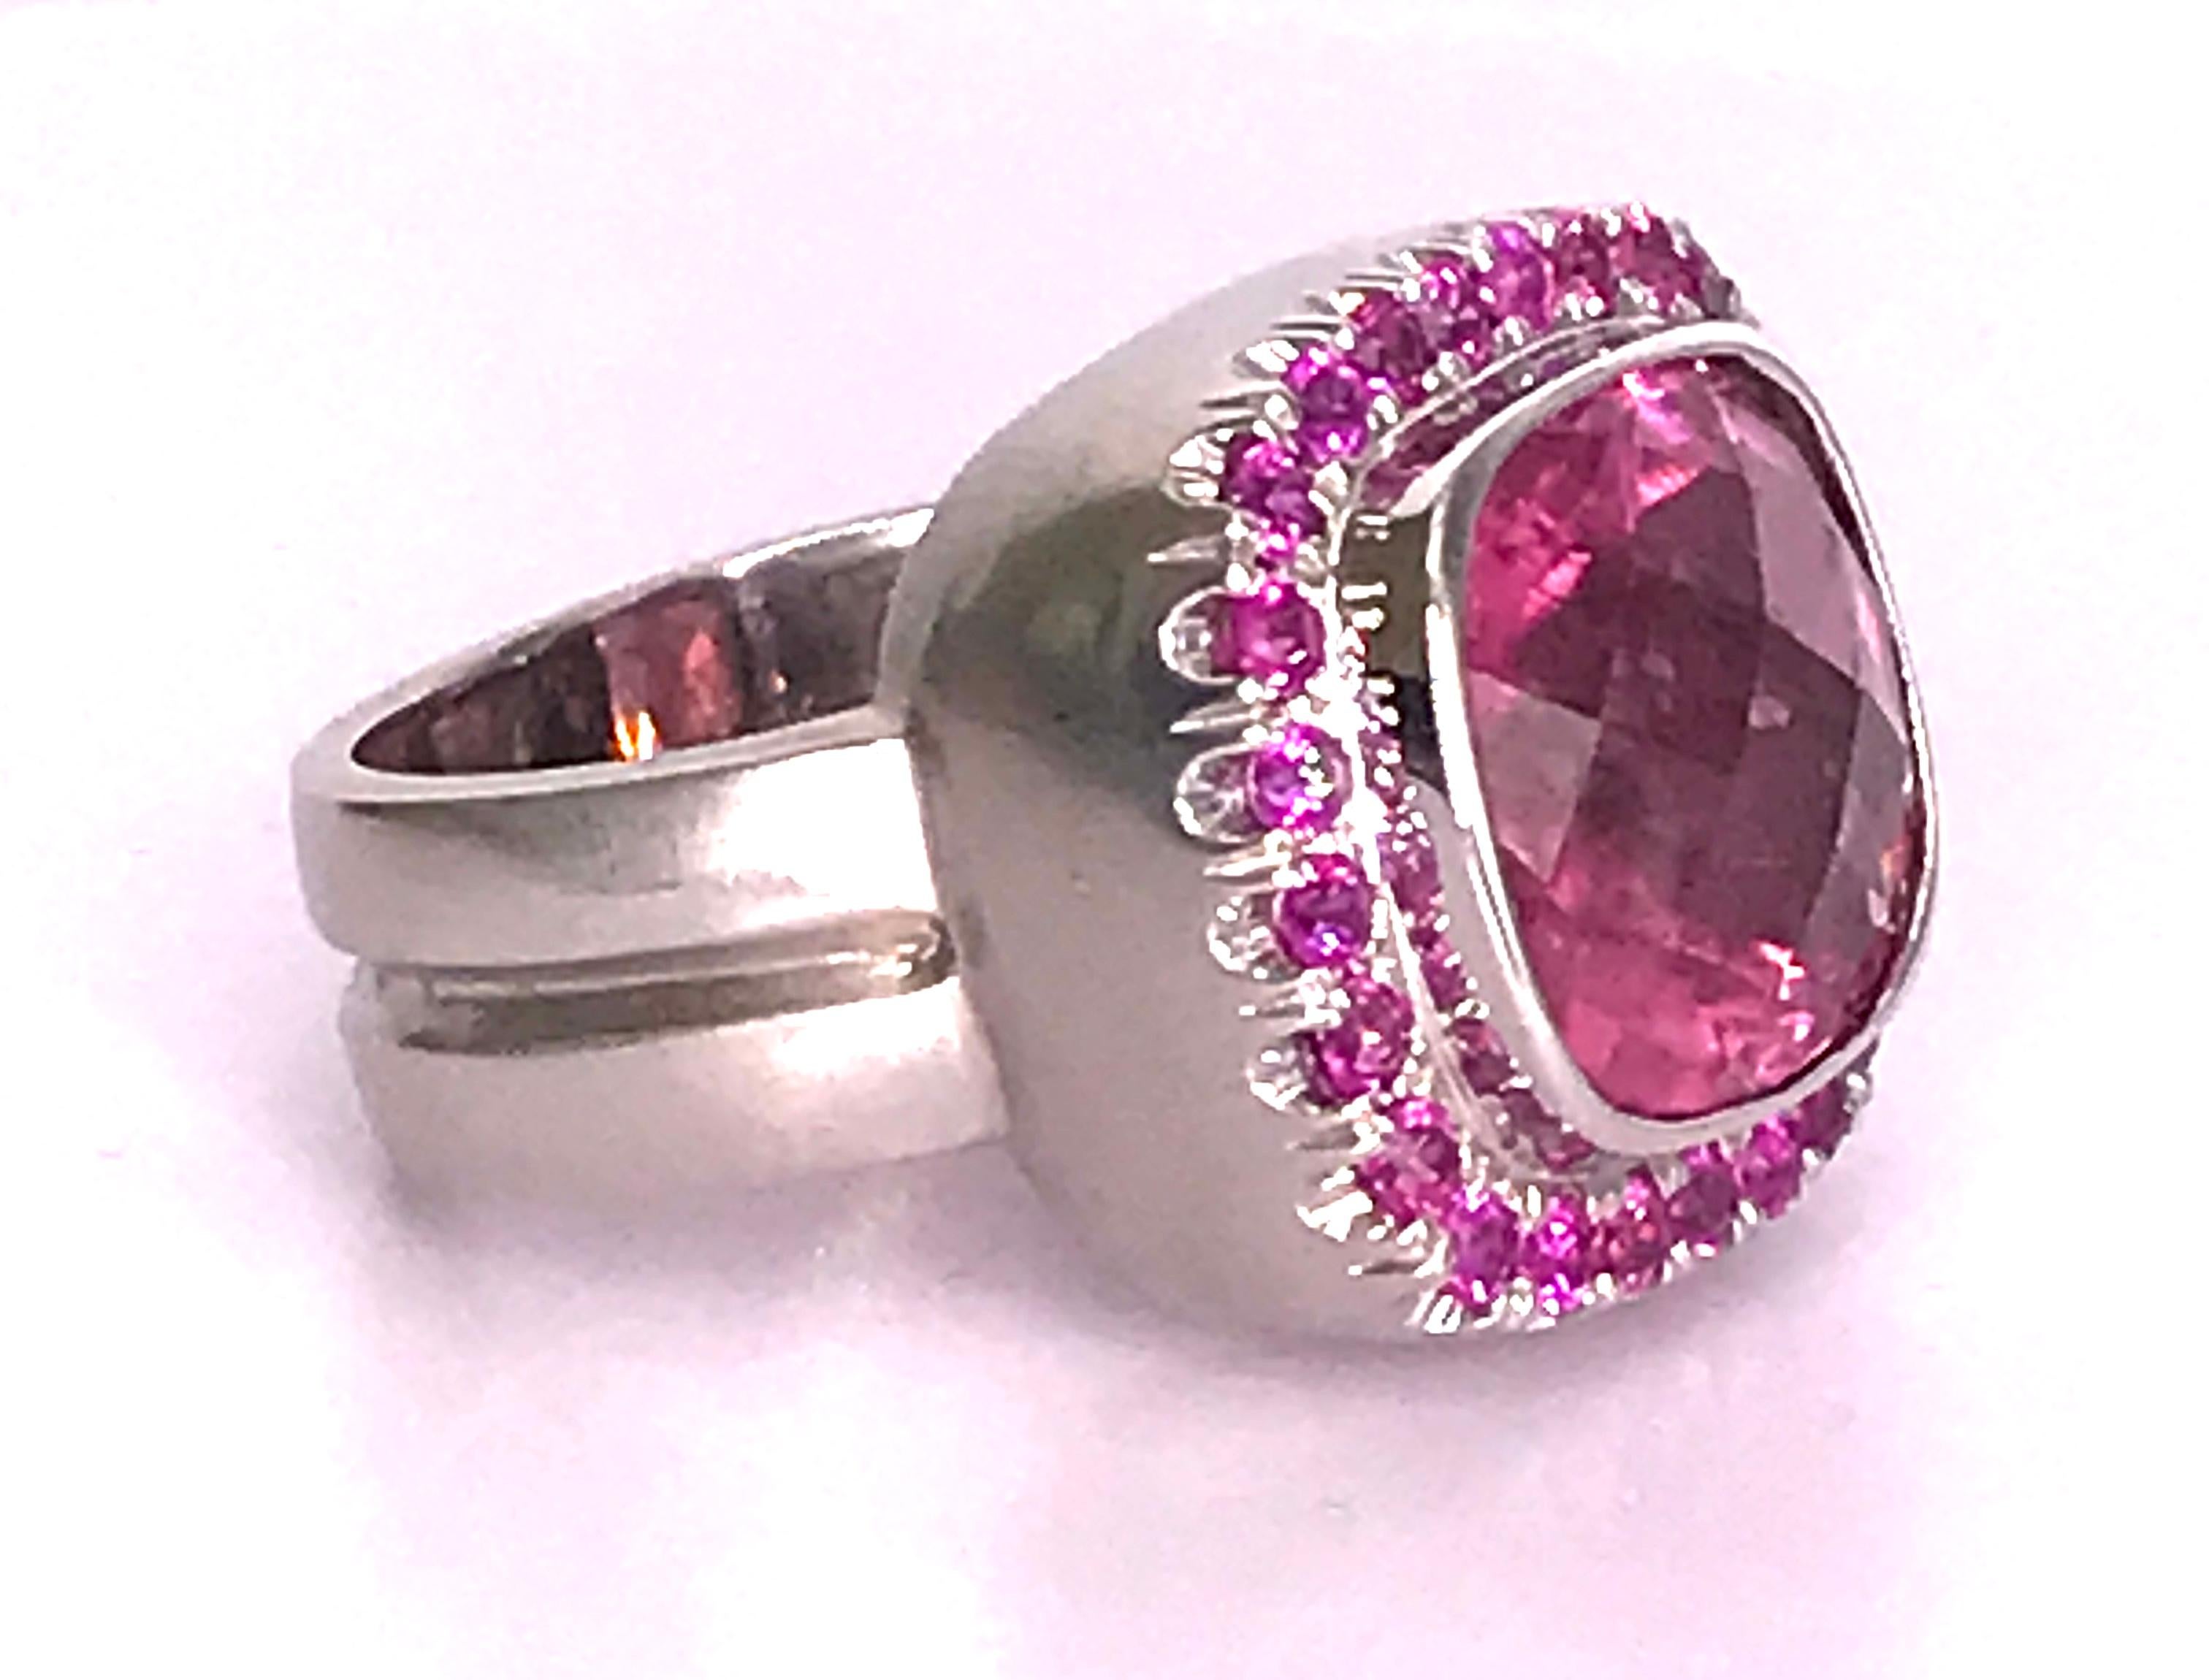 I fell in love with this very Pink 8 Carat Tourmaline enhanced by Pink Sapphires set in 18 Kt white Gold. Checkered board cut. The gold is sandblasted but can be polished.